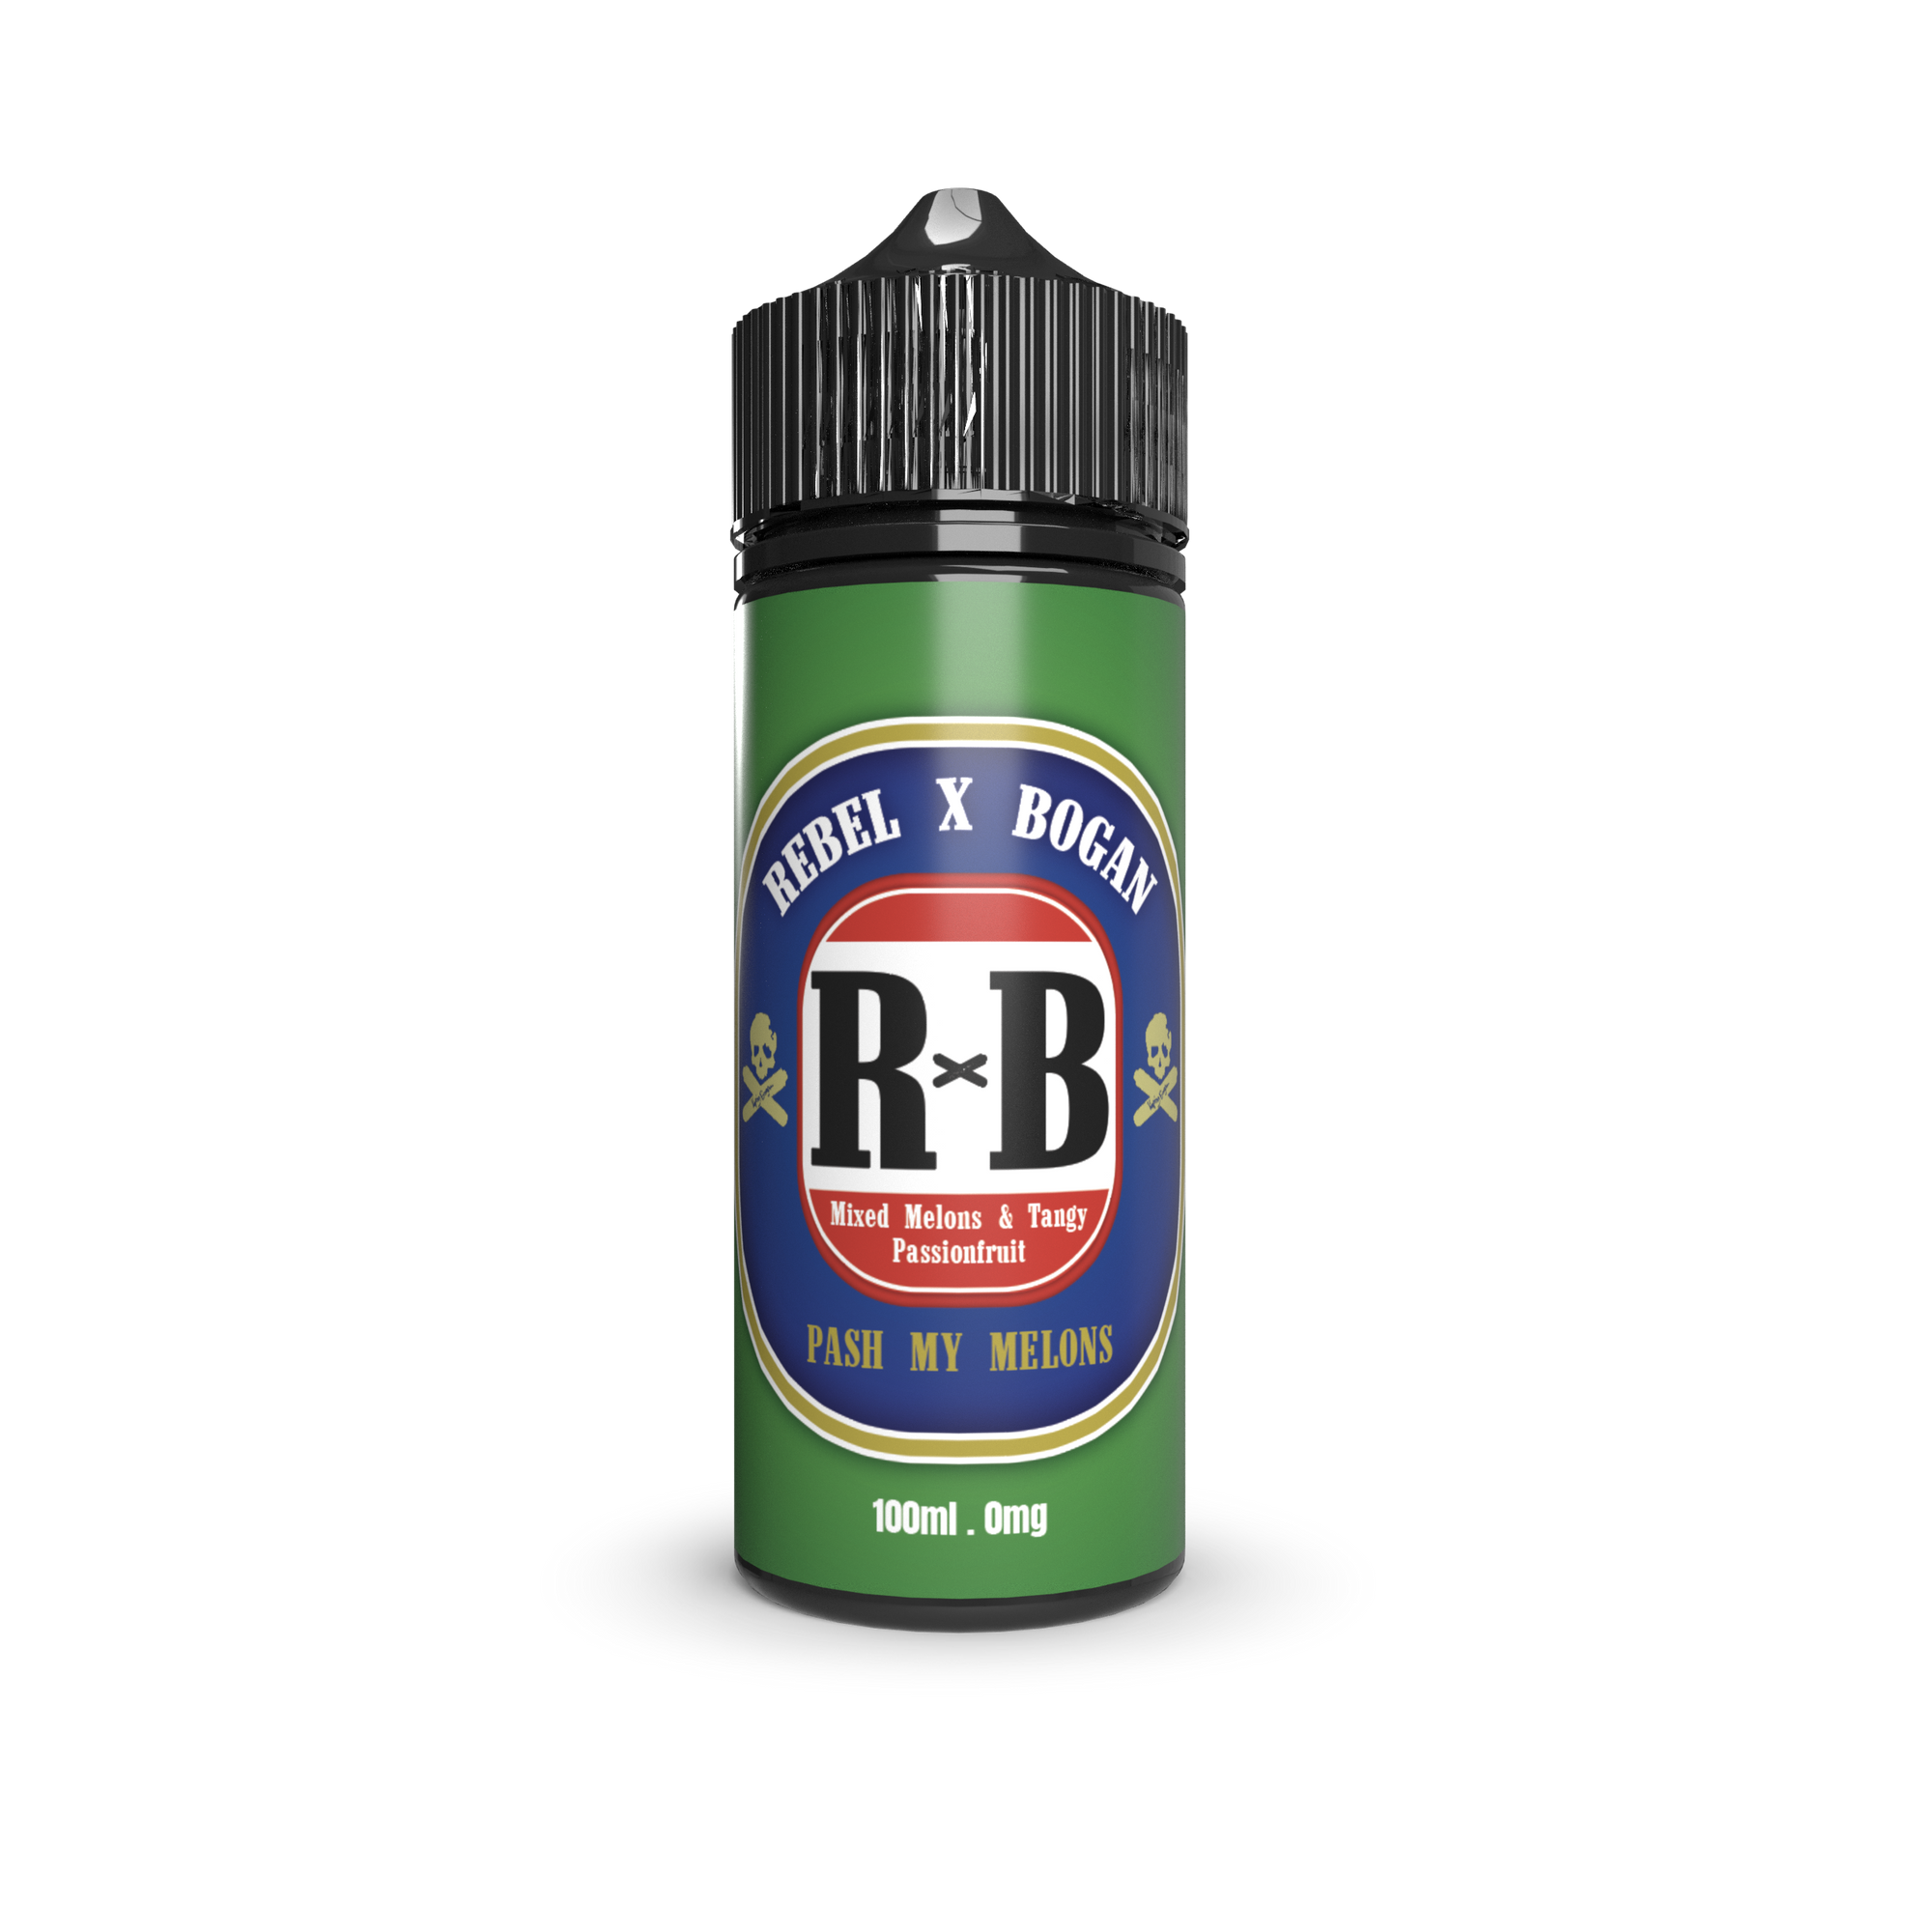 Buy Pash My Melons By Rebel and Bogan - Wick and Wire Co Melbourne Vape Shop, Victoria Australia